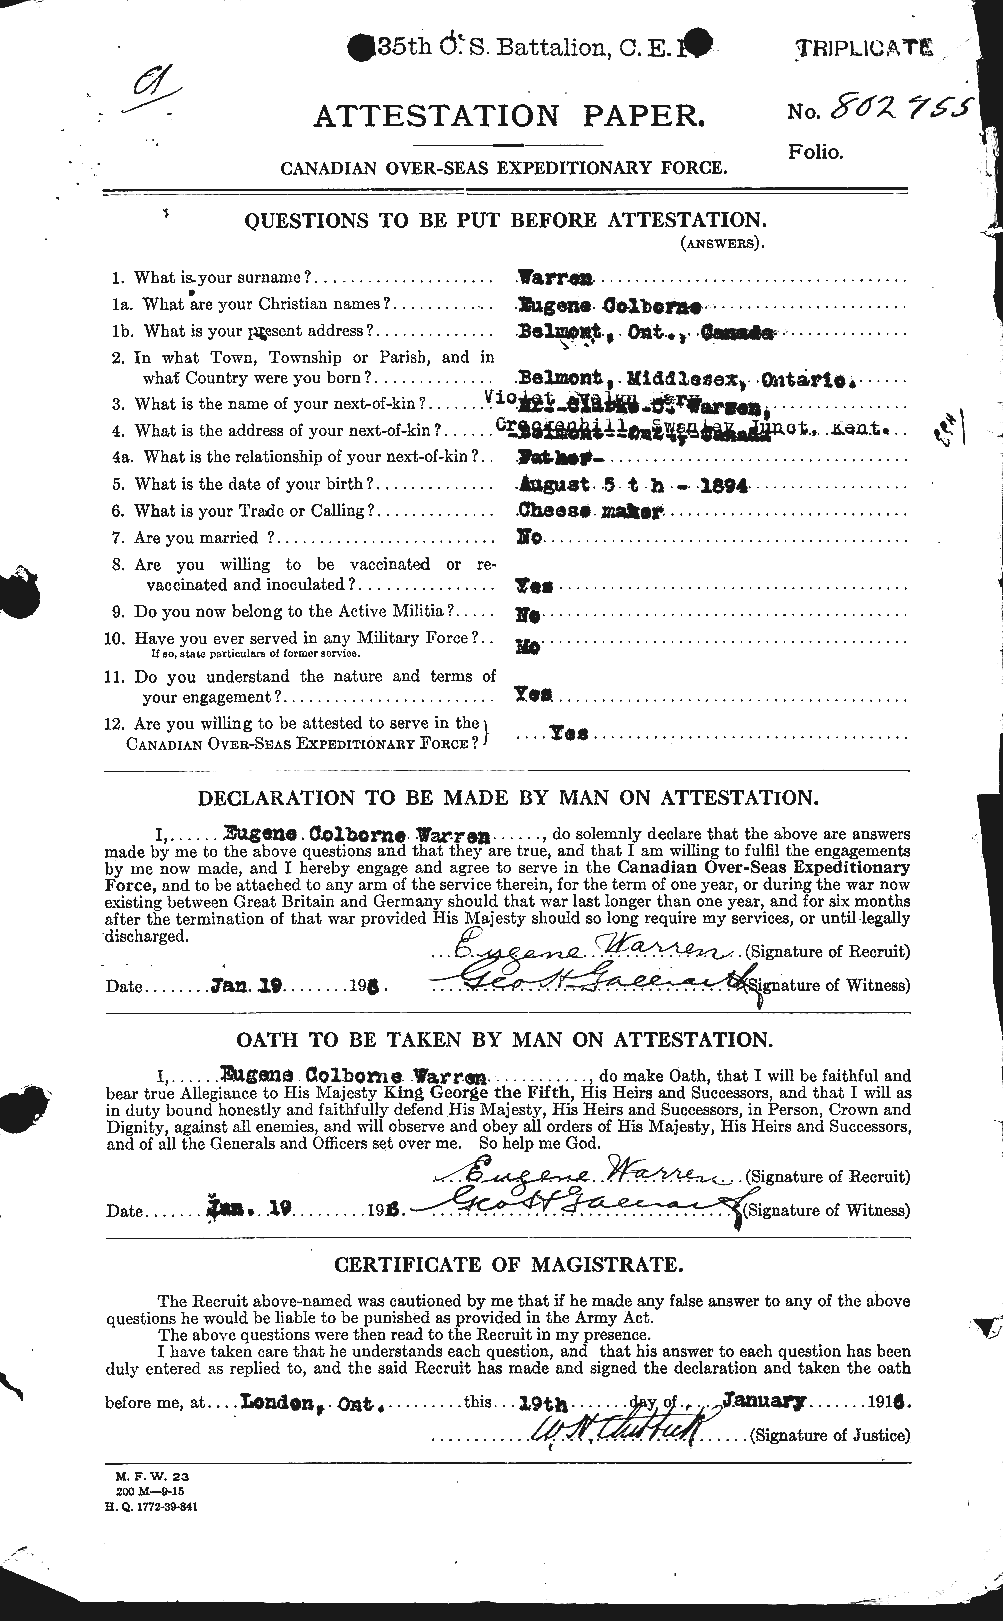 Personnel Records of the First World War - CEF 658425a